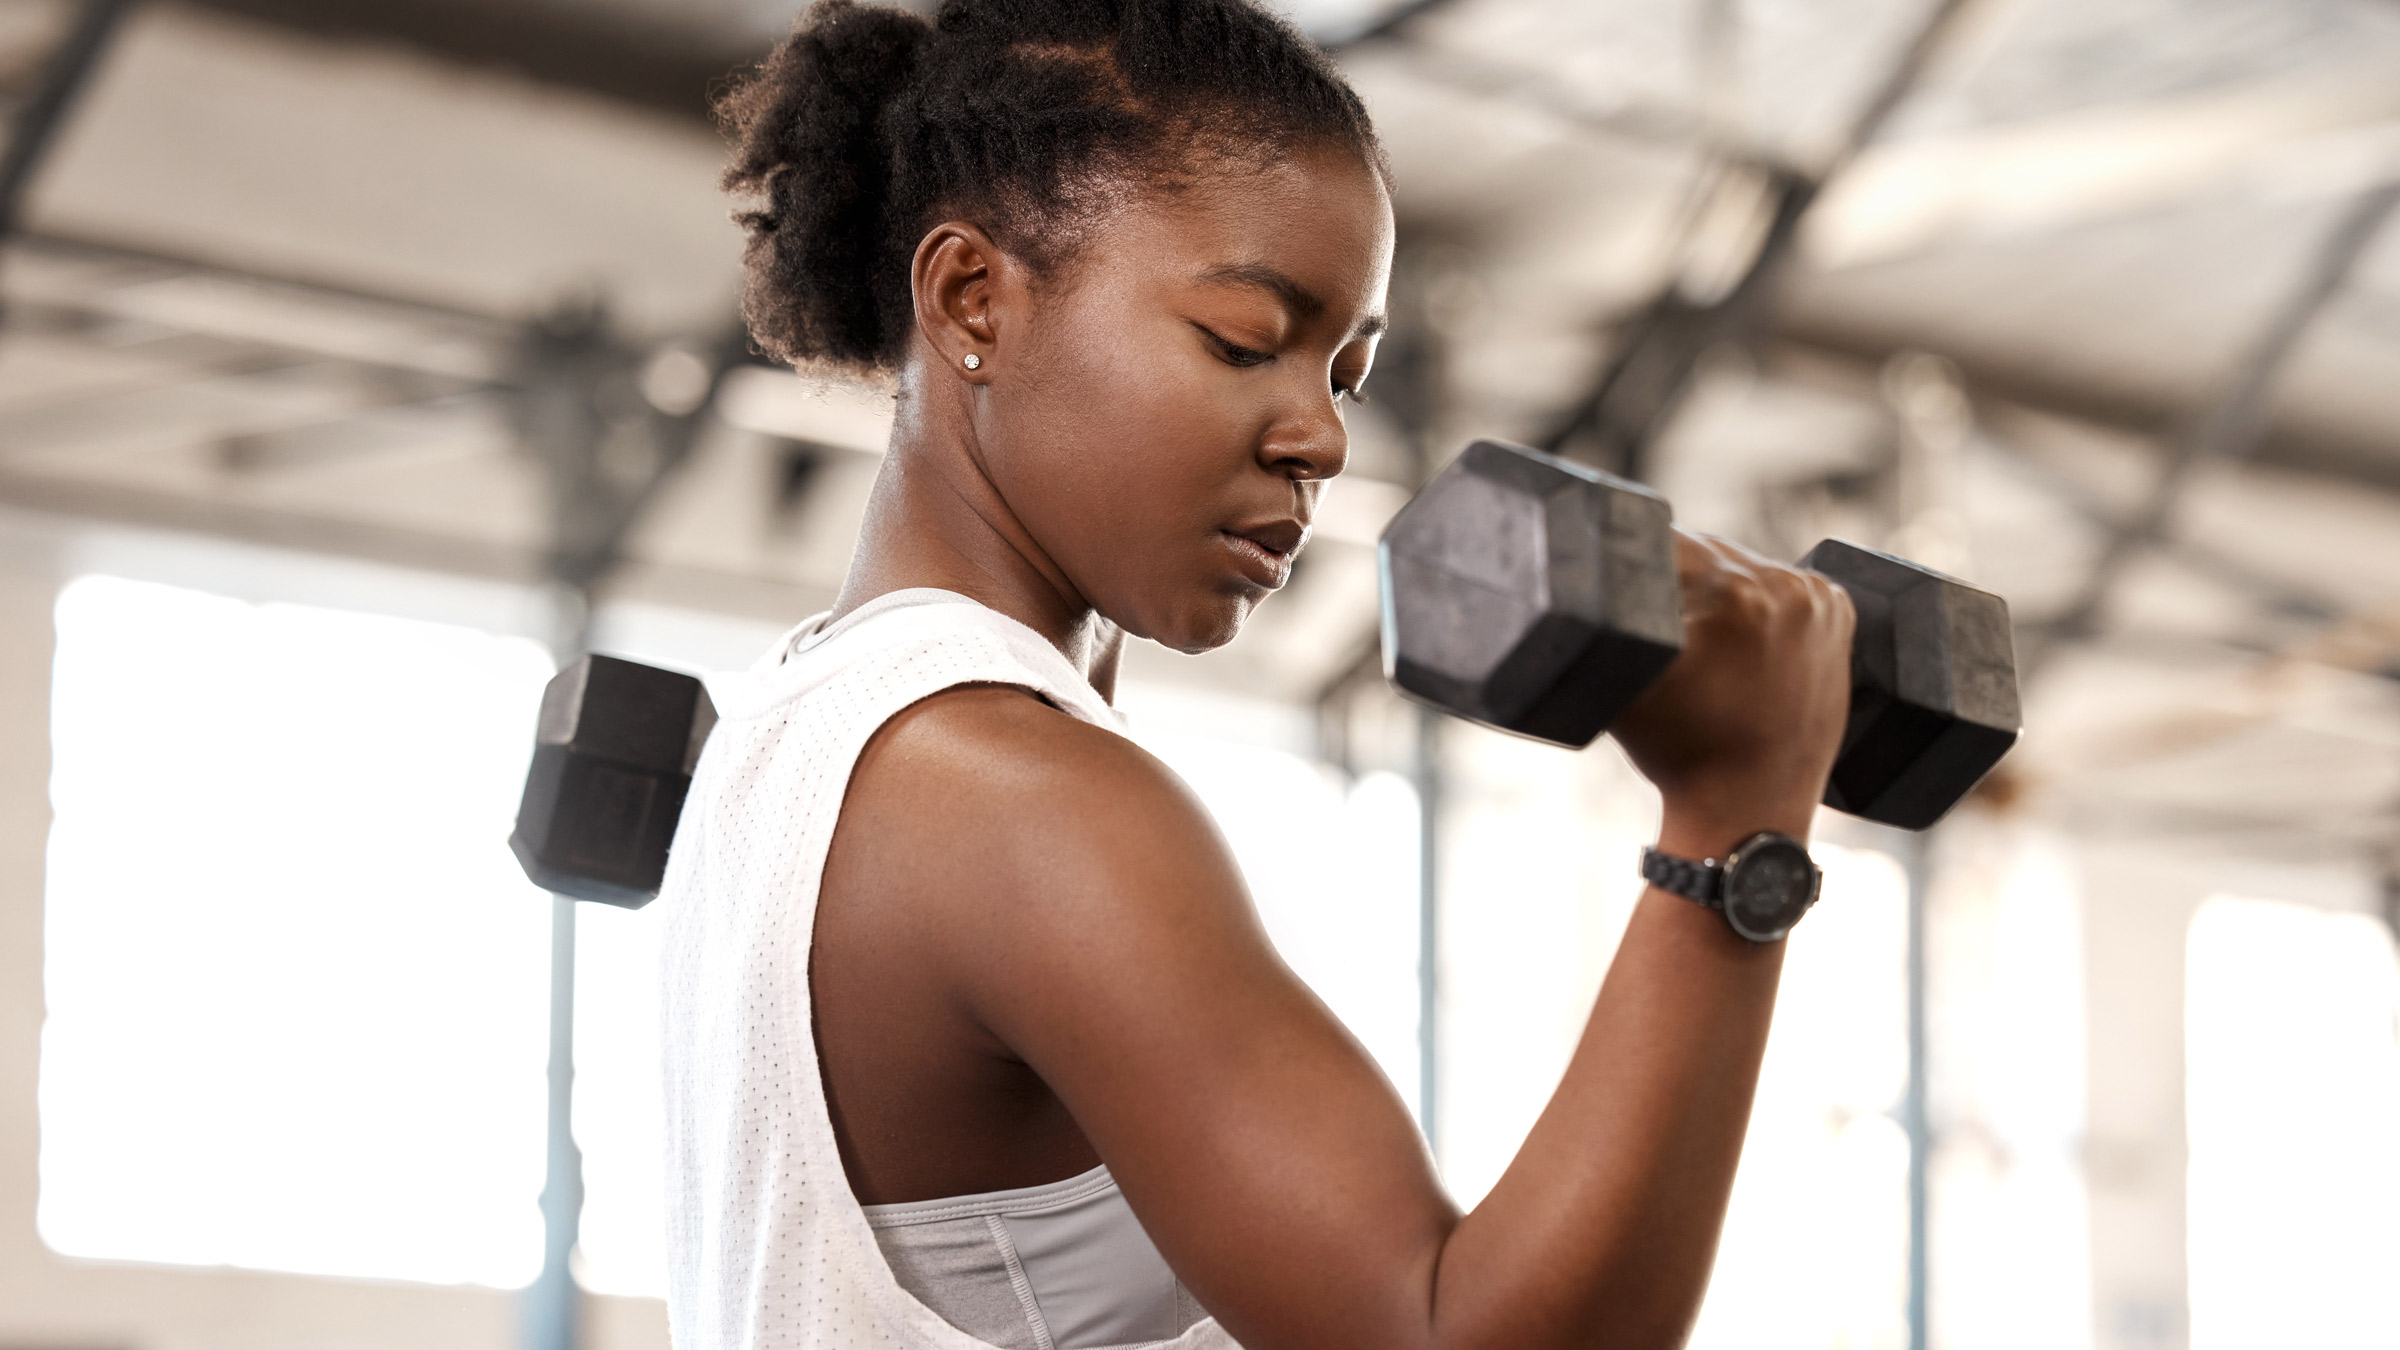 Diet-Resistant Women Respond Well to Exercise - Science Connected